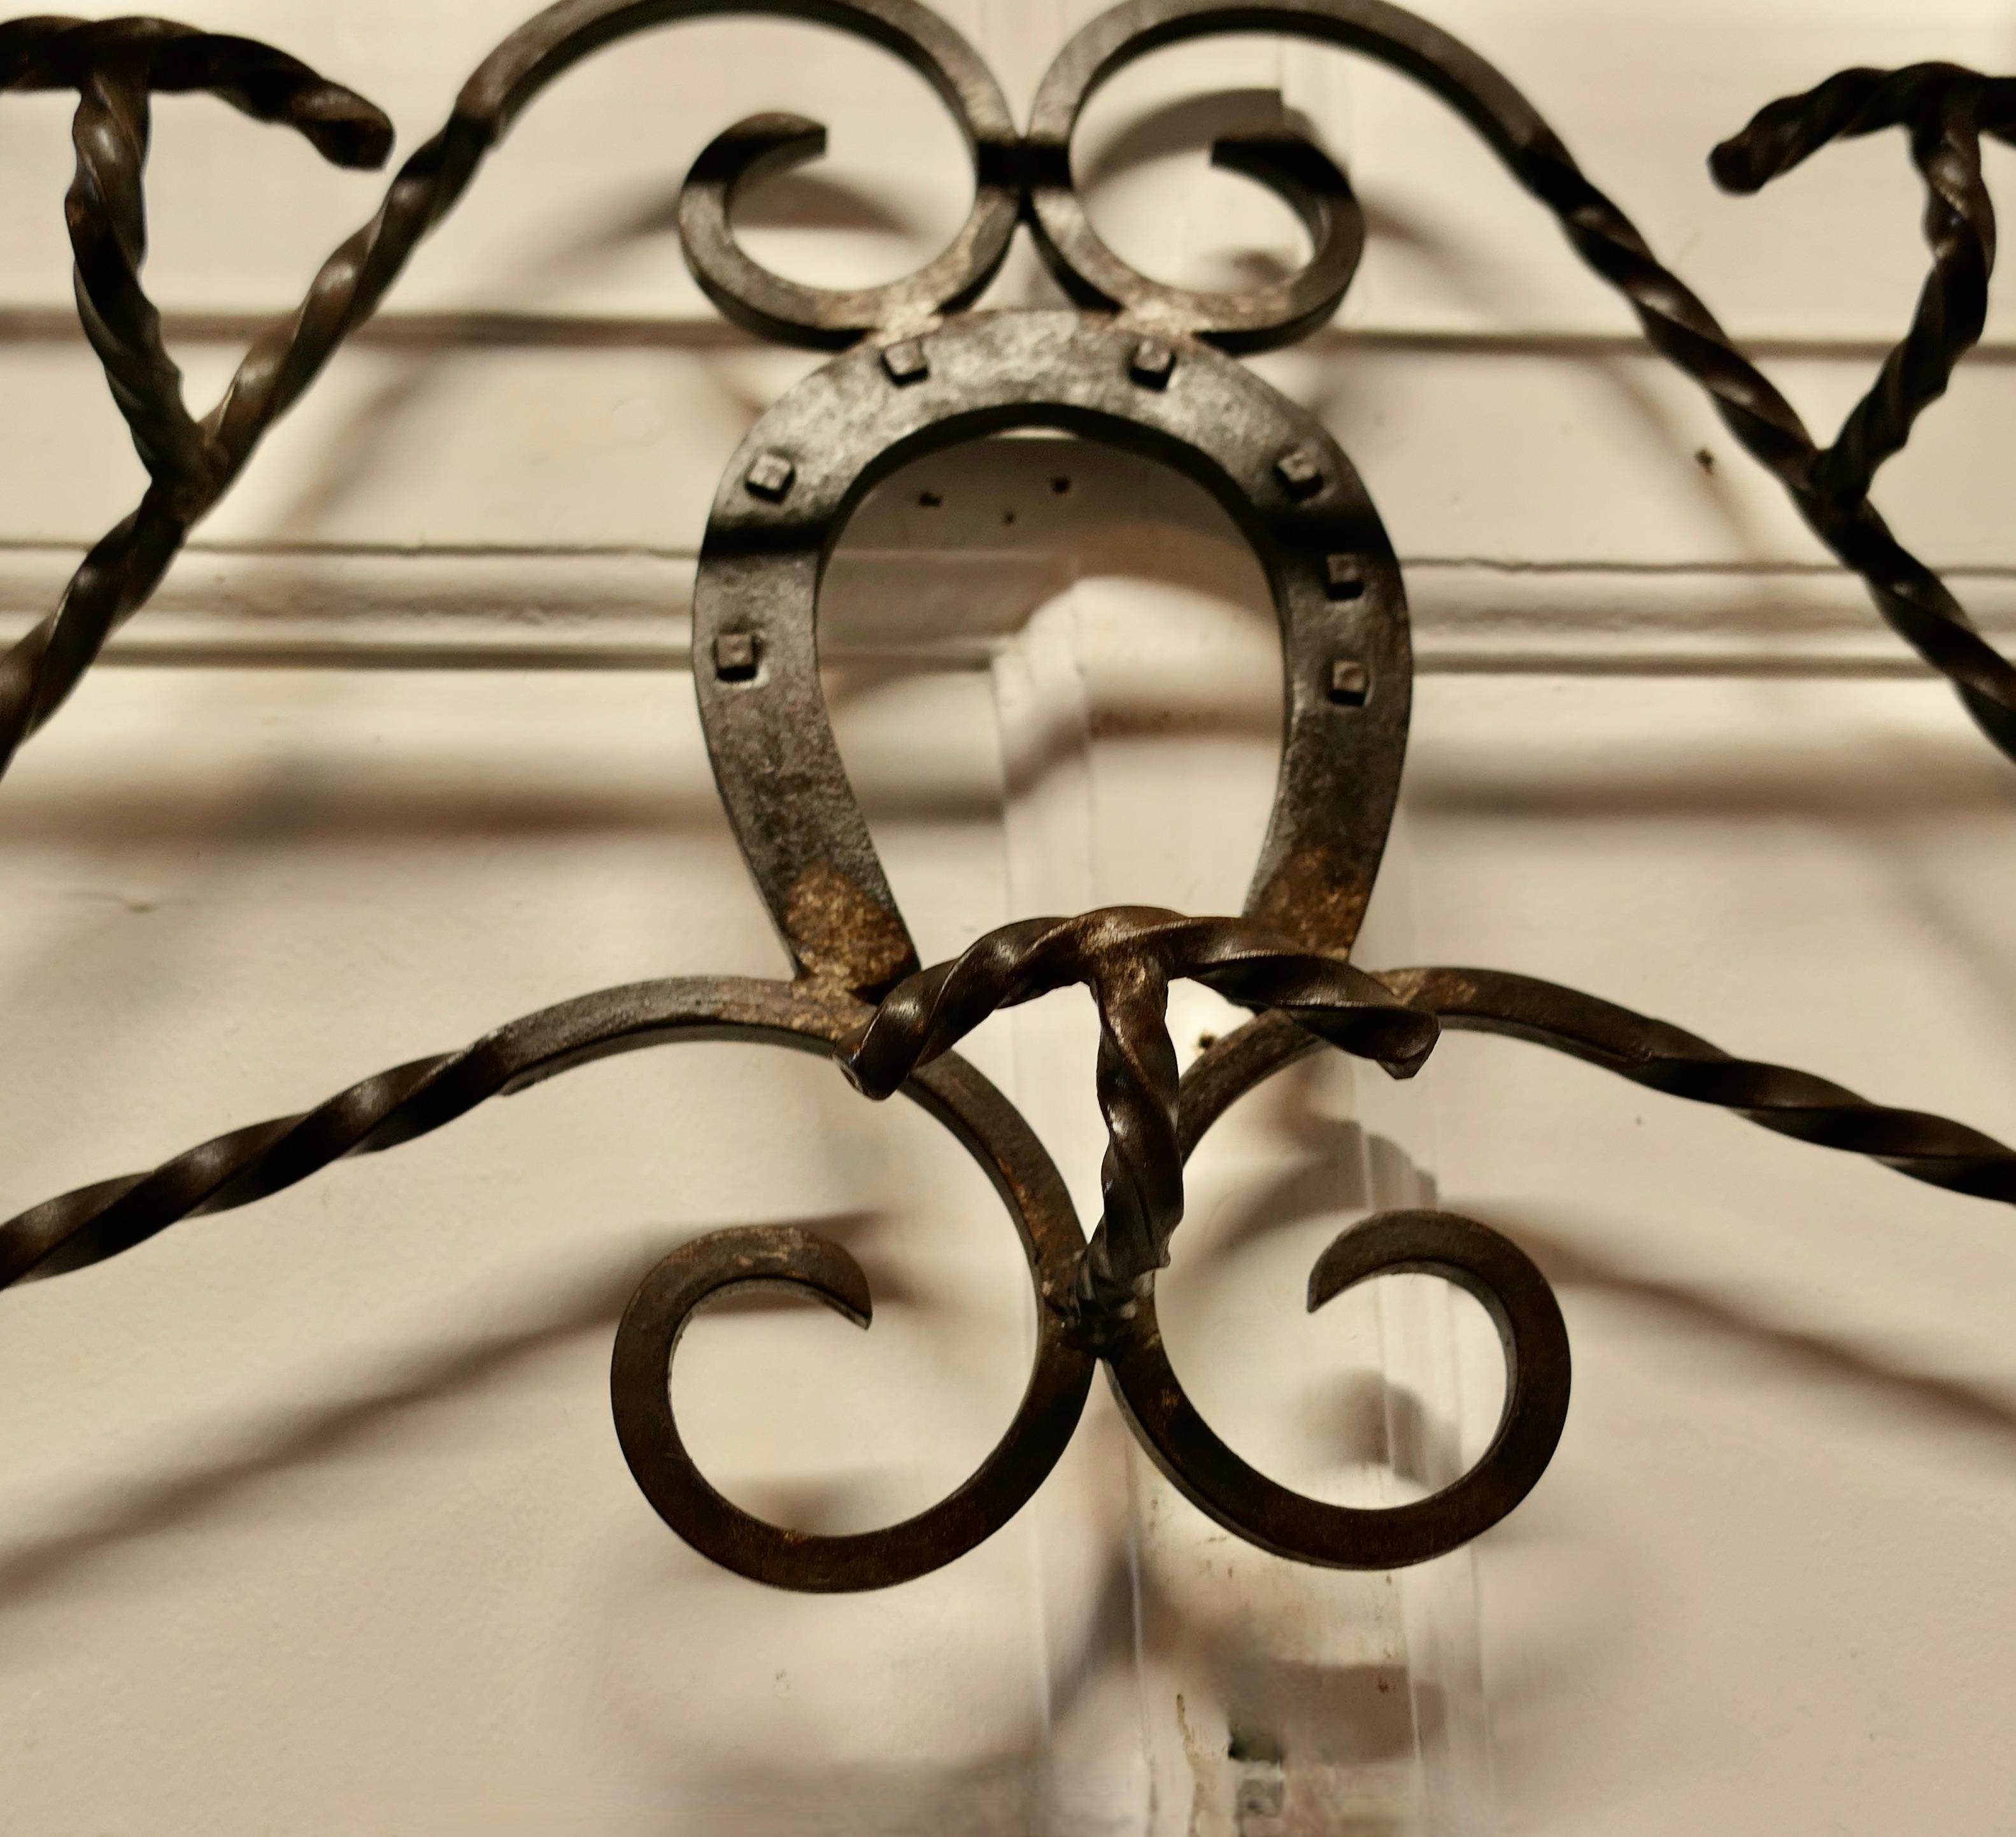 Early 20th Century French Wrought Iron Wall Hanging Rack for Coats and Tack on a Horse Riding Theme For Sale